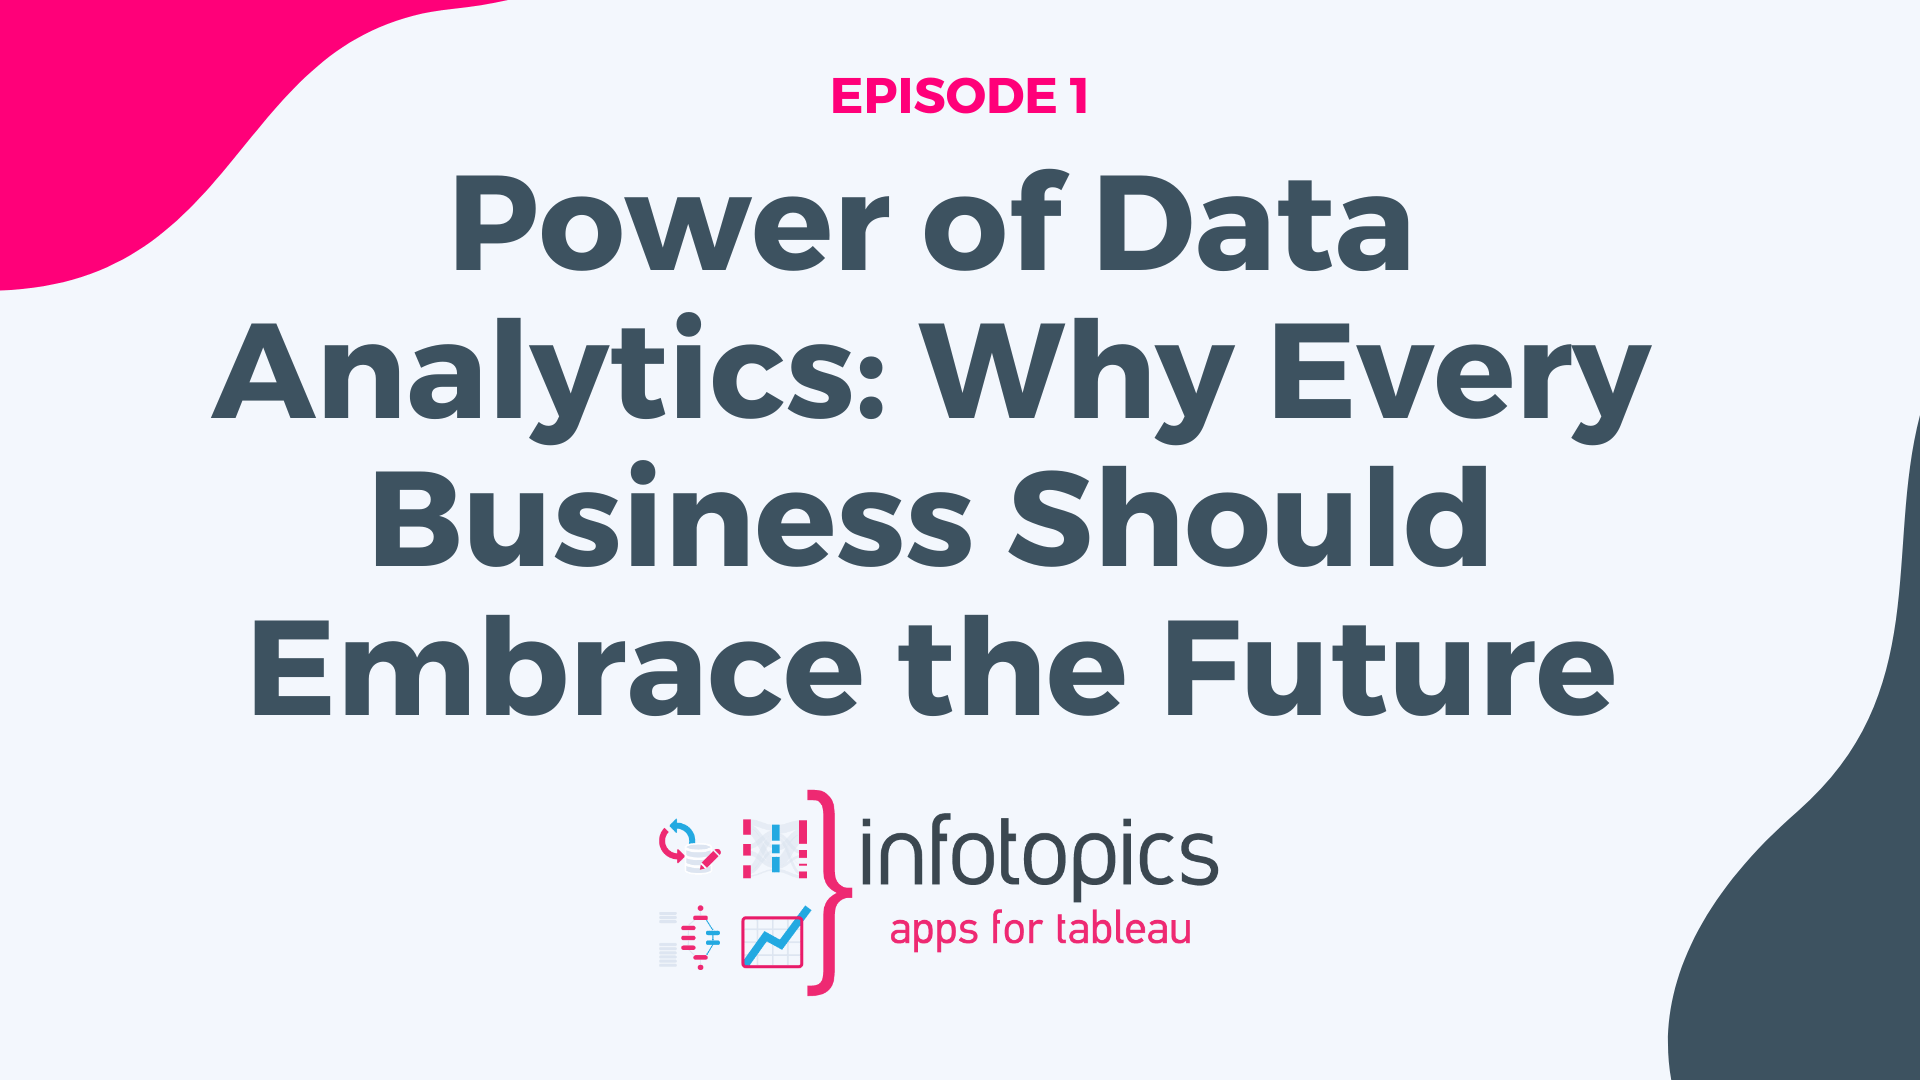 The Power of Data Analytics: Why Every Business Should Embrace the Future